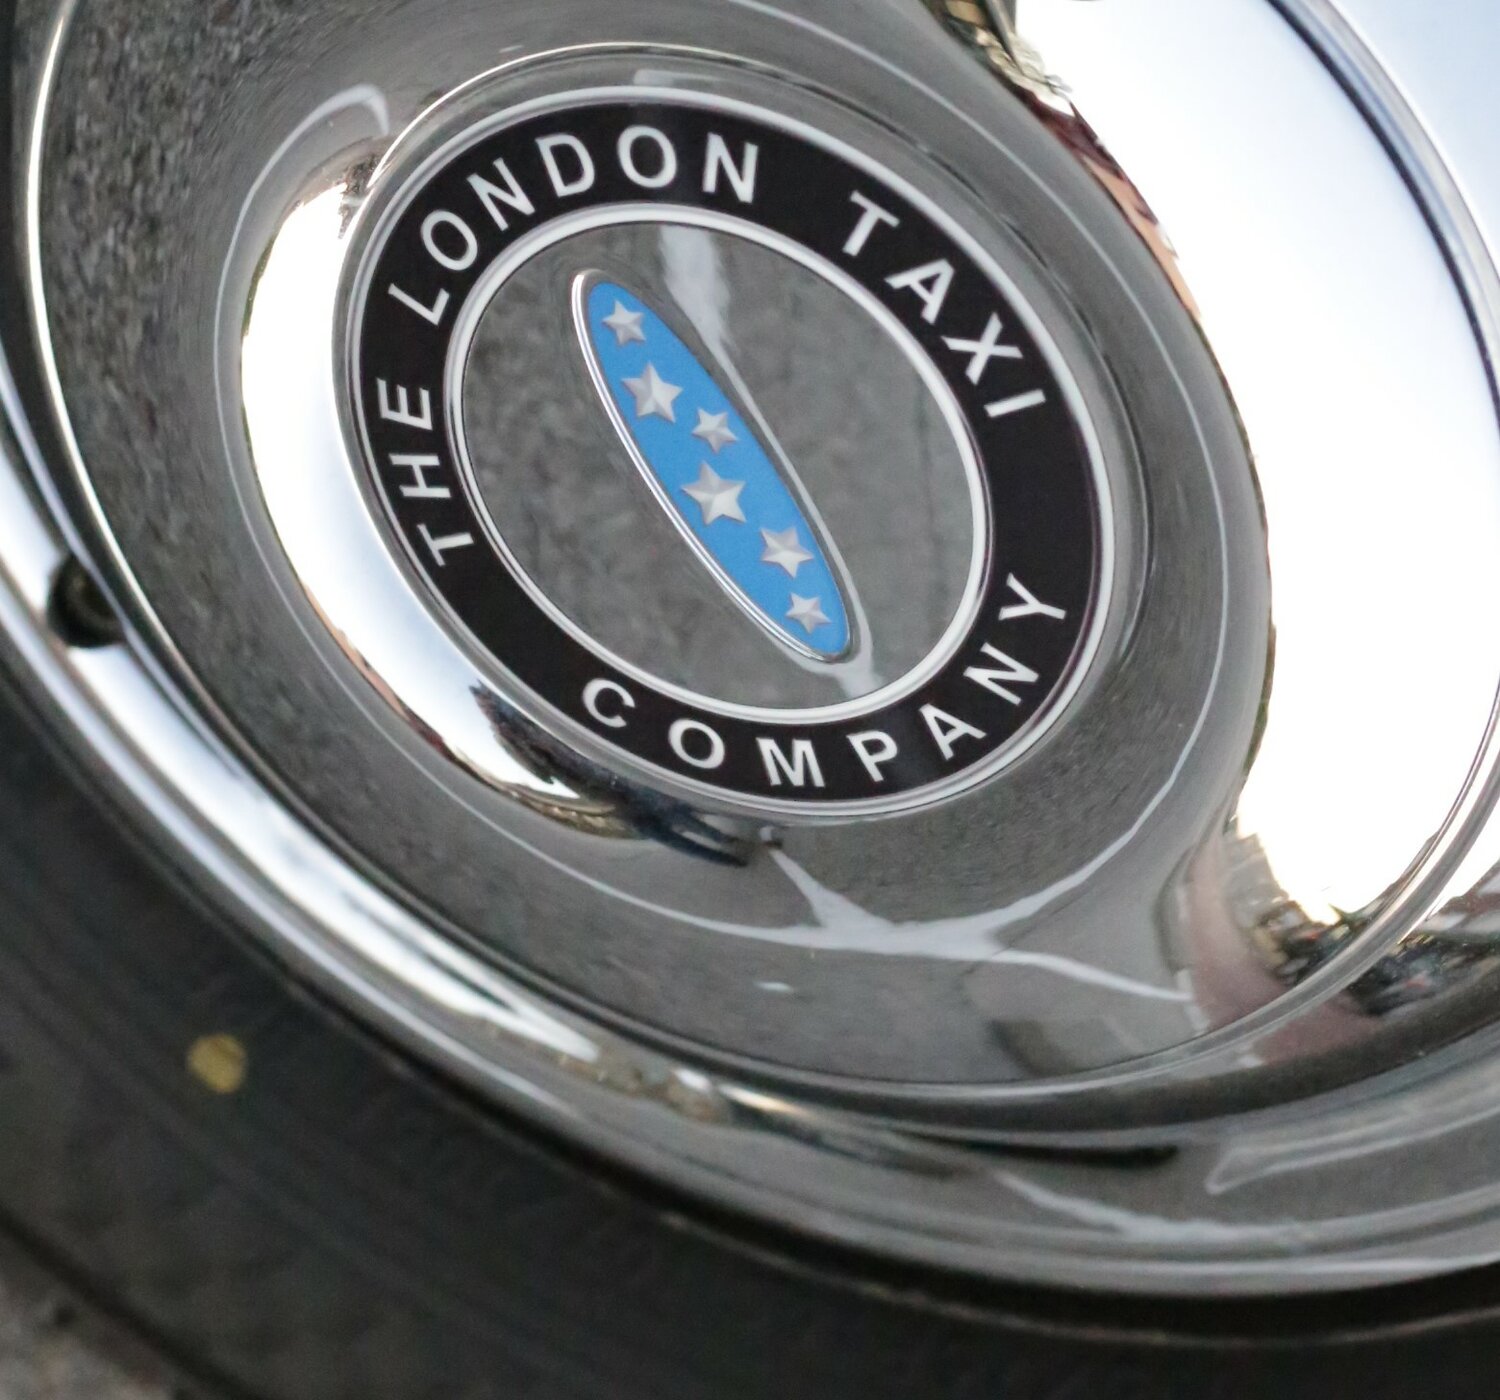 Some of the detail from the wheel cover of Mark Anderson's appropriately named Winston.